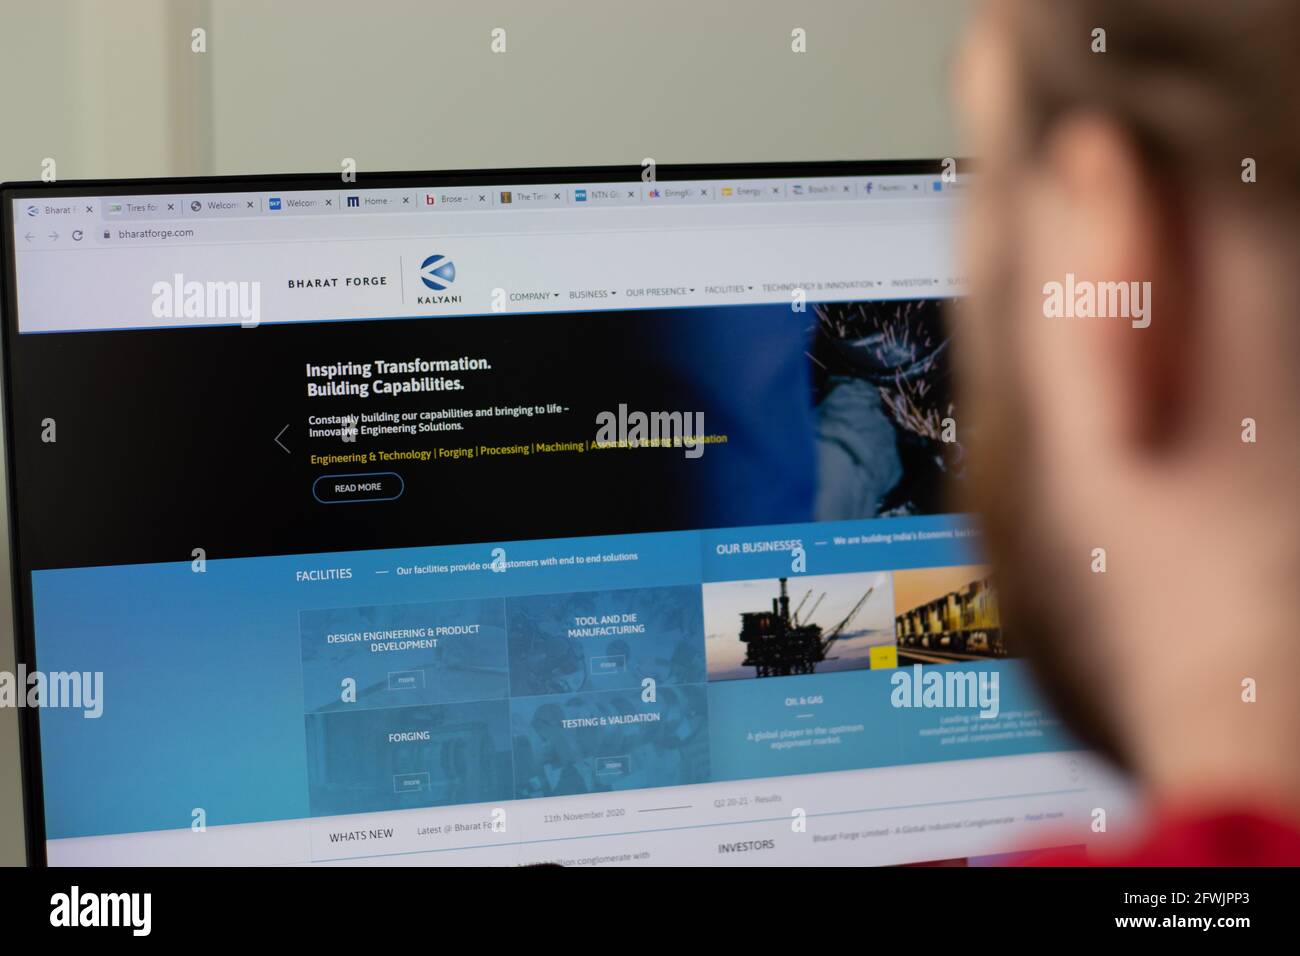 New York, USA - 1 May 2021: Bharat Forge company website with logo on screen, Illustrative Editorial Stock Photo